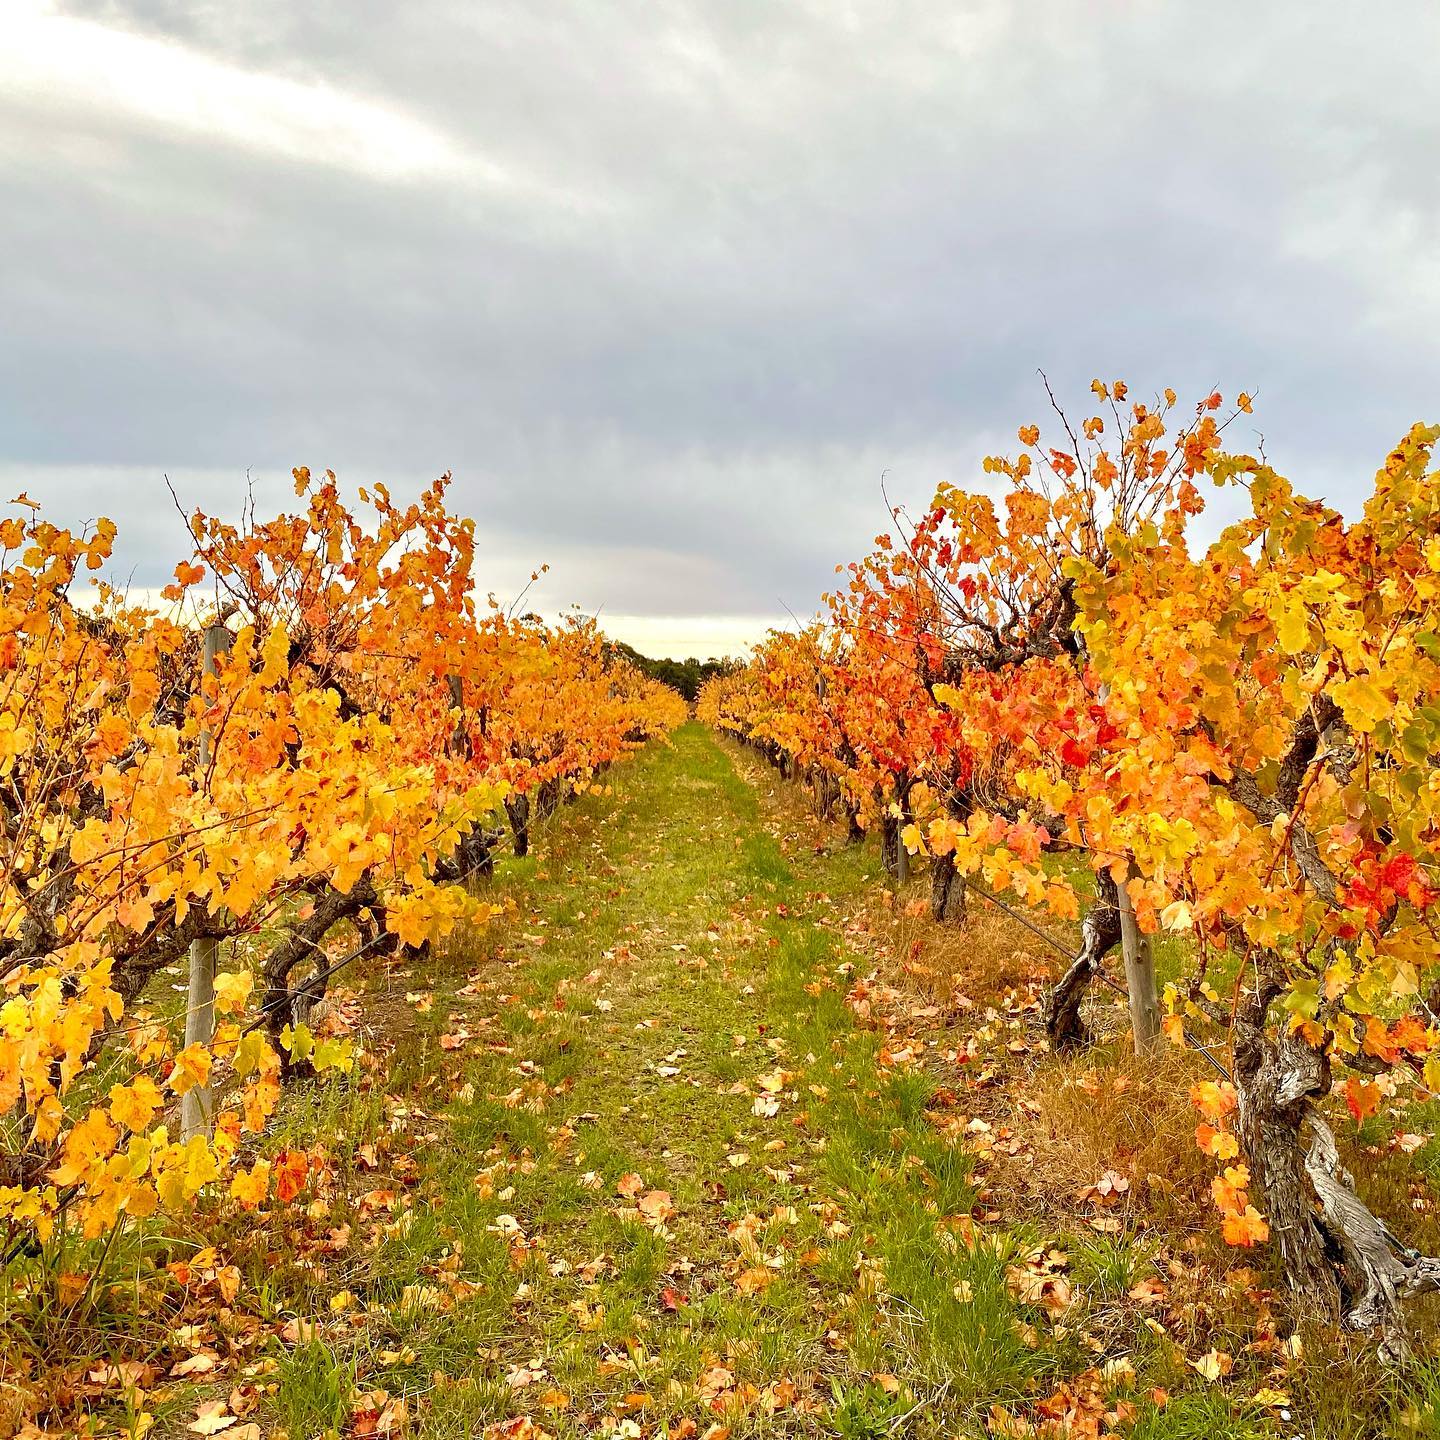 Autumn vines in the Adelaide Hills